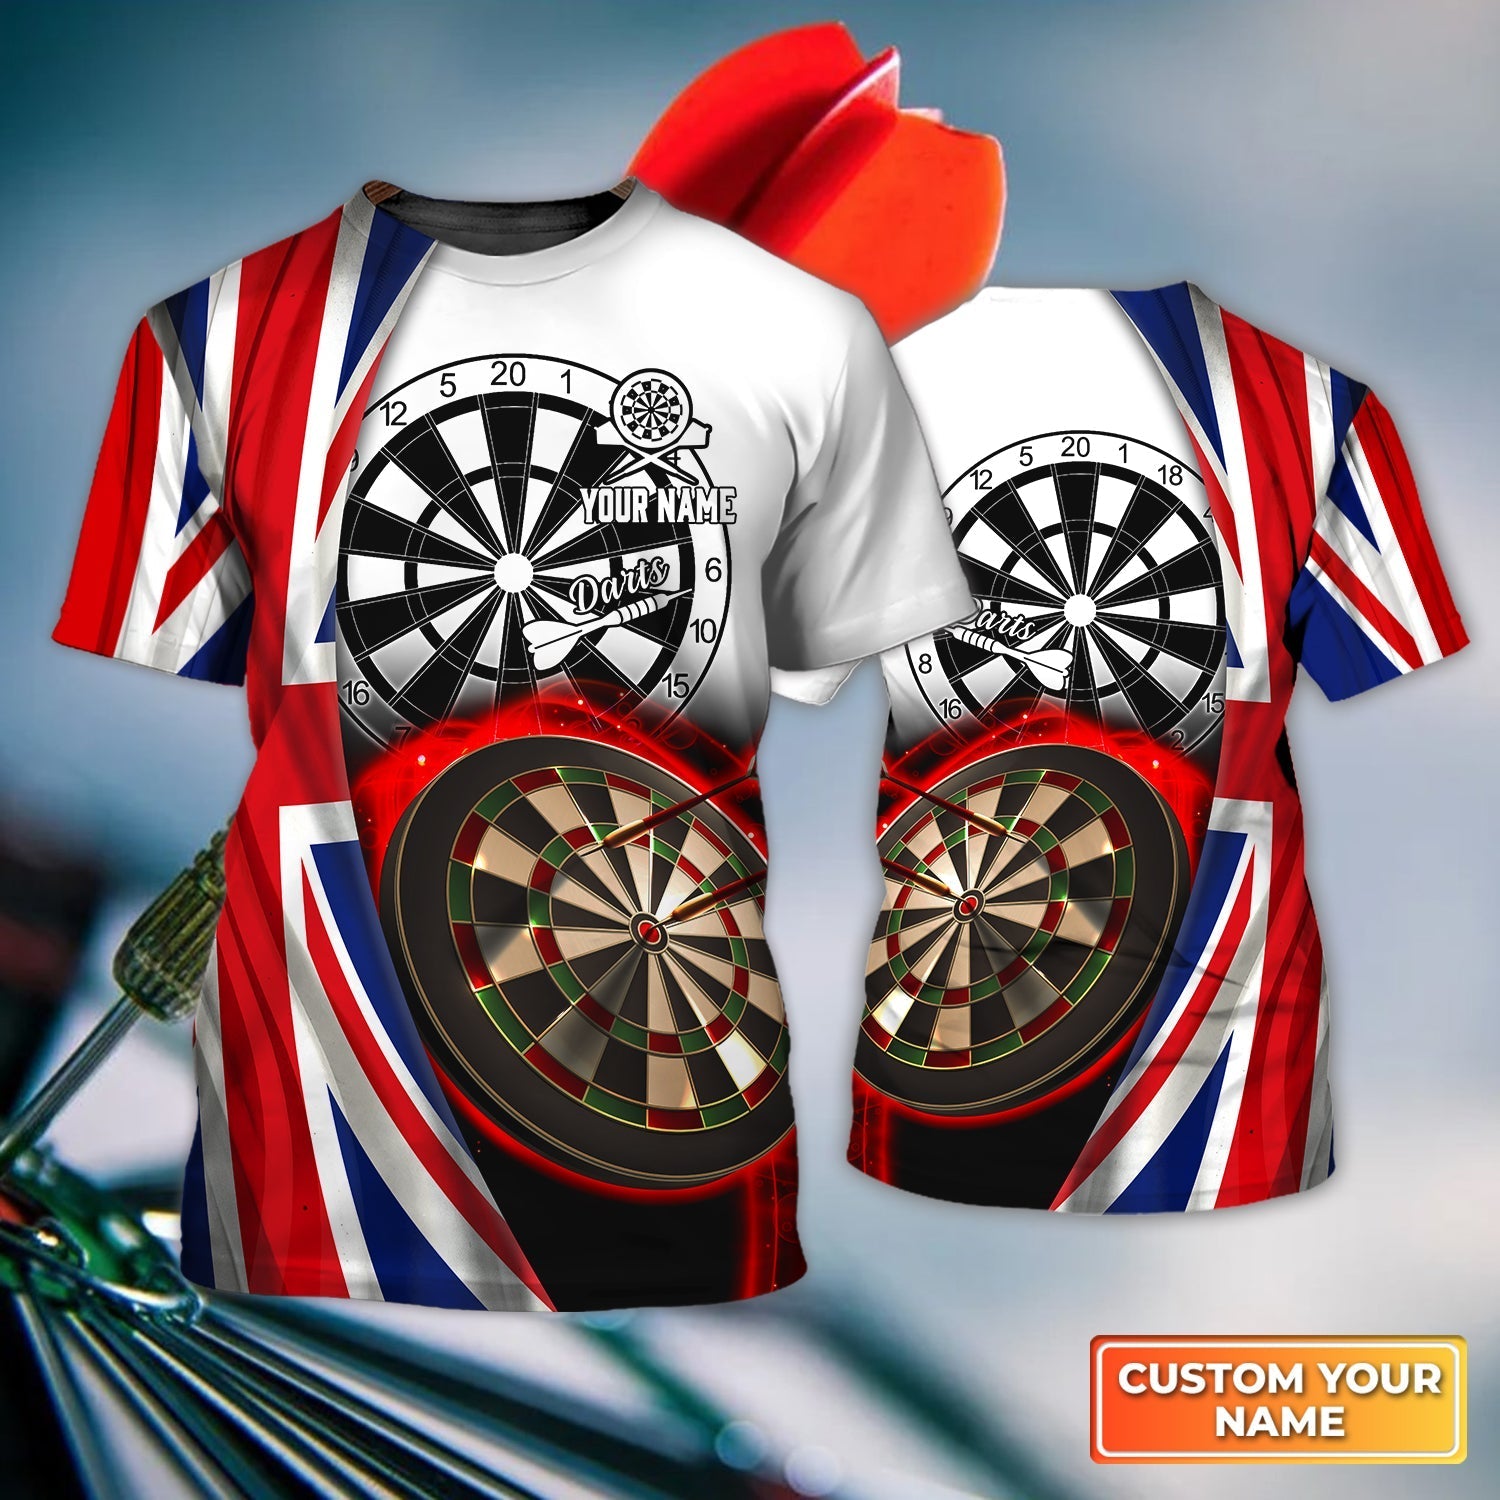 Put Me Down For 100 Personalized Name 3D Tshirt For Darts Player – DT111